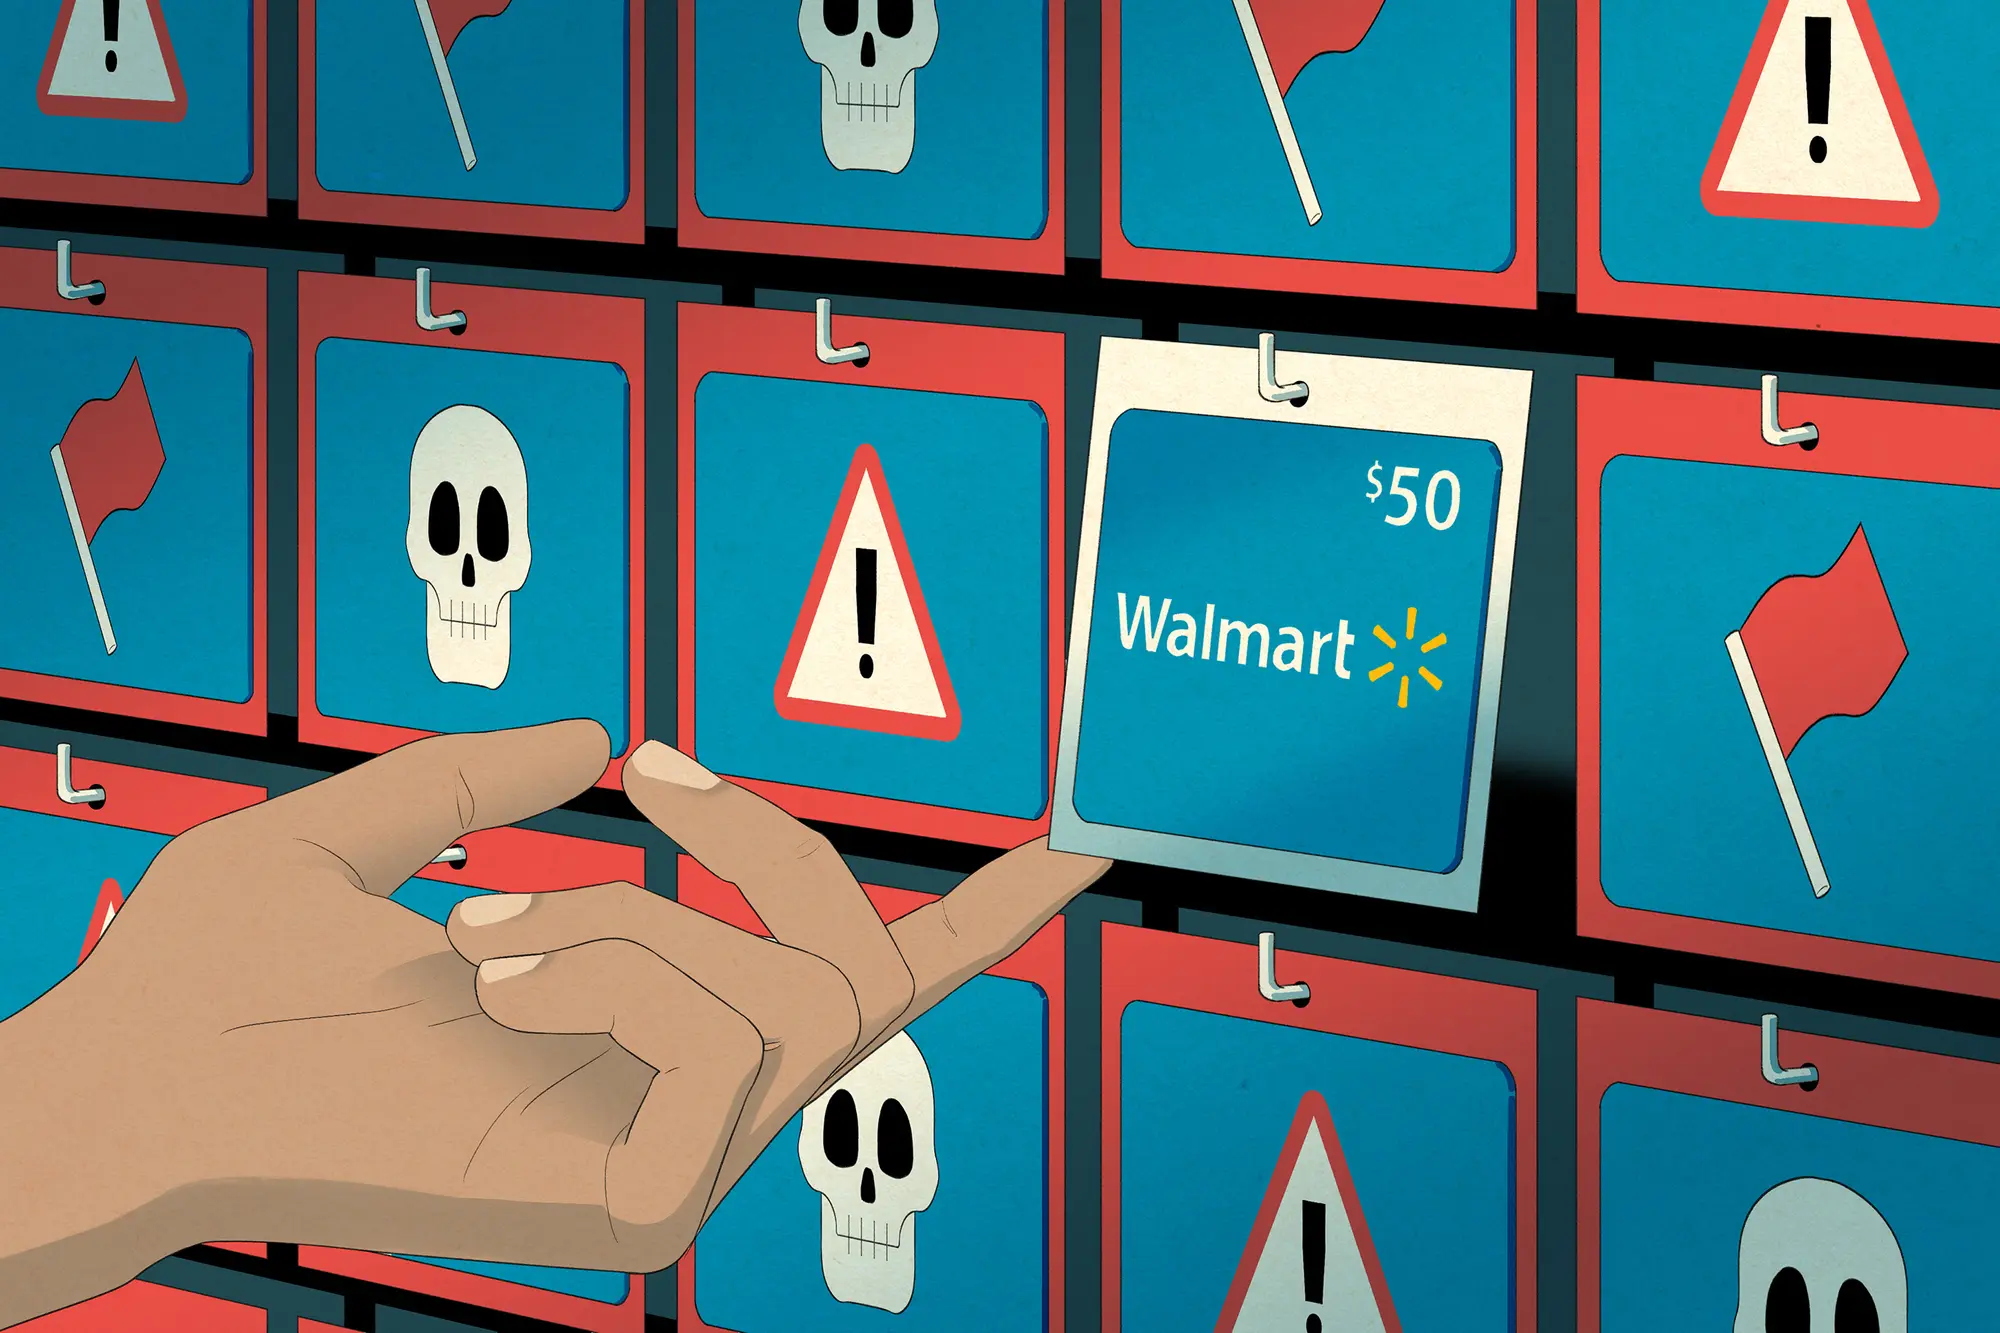 How Walmart’s Financial Services Became a Fraud Magnet (propublica.org)